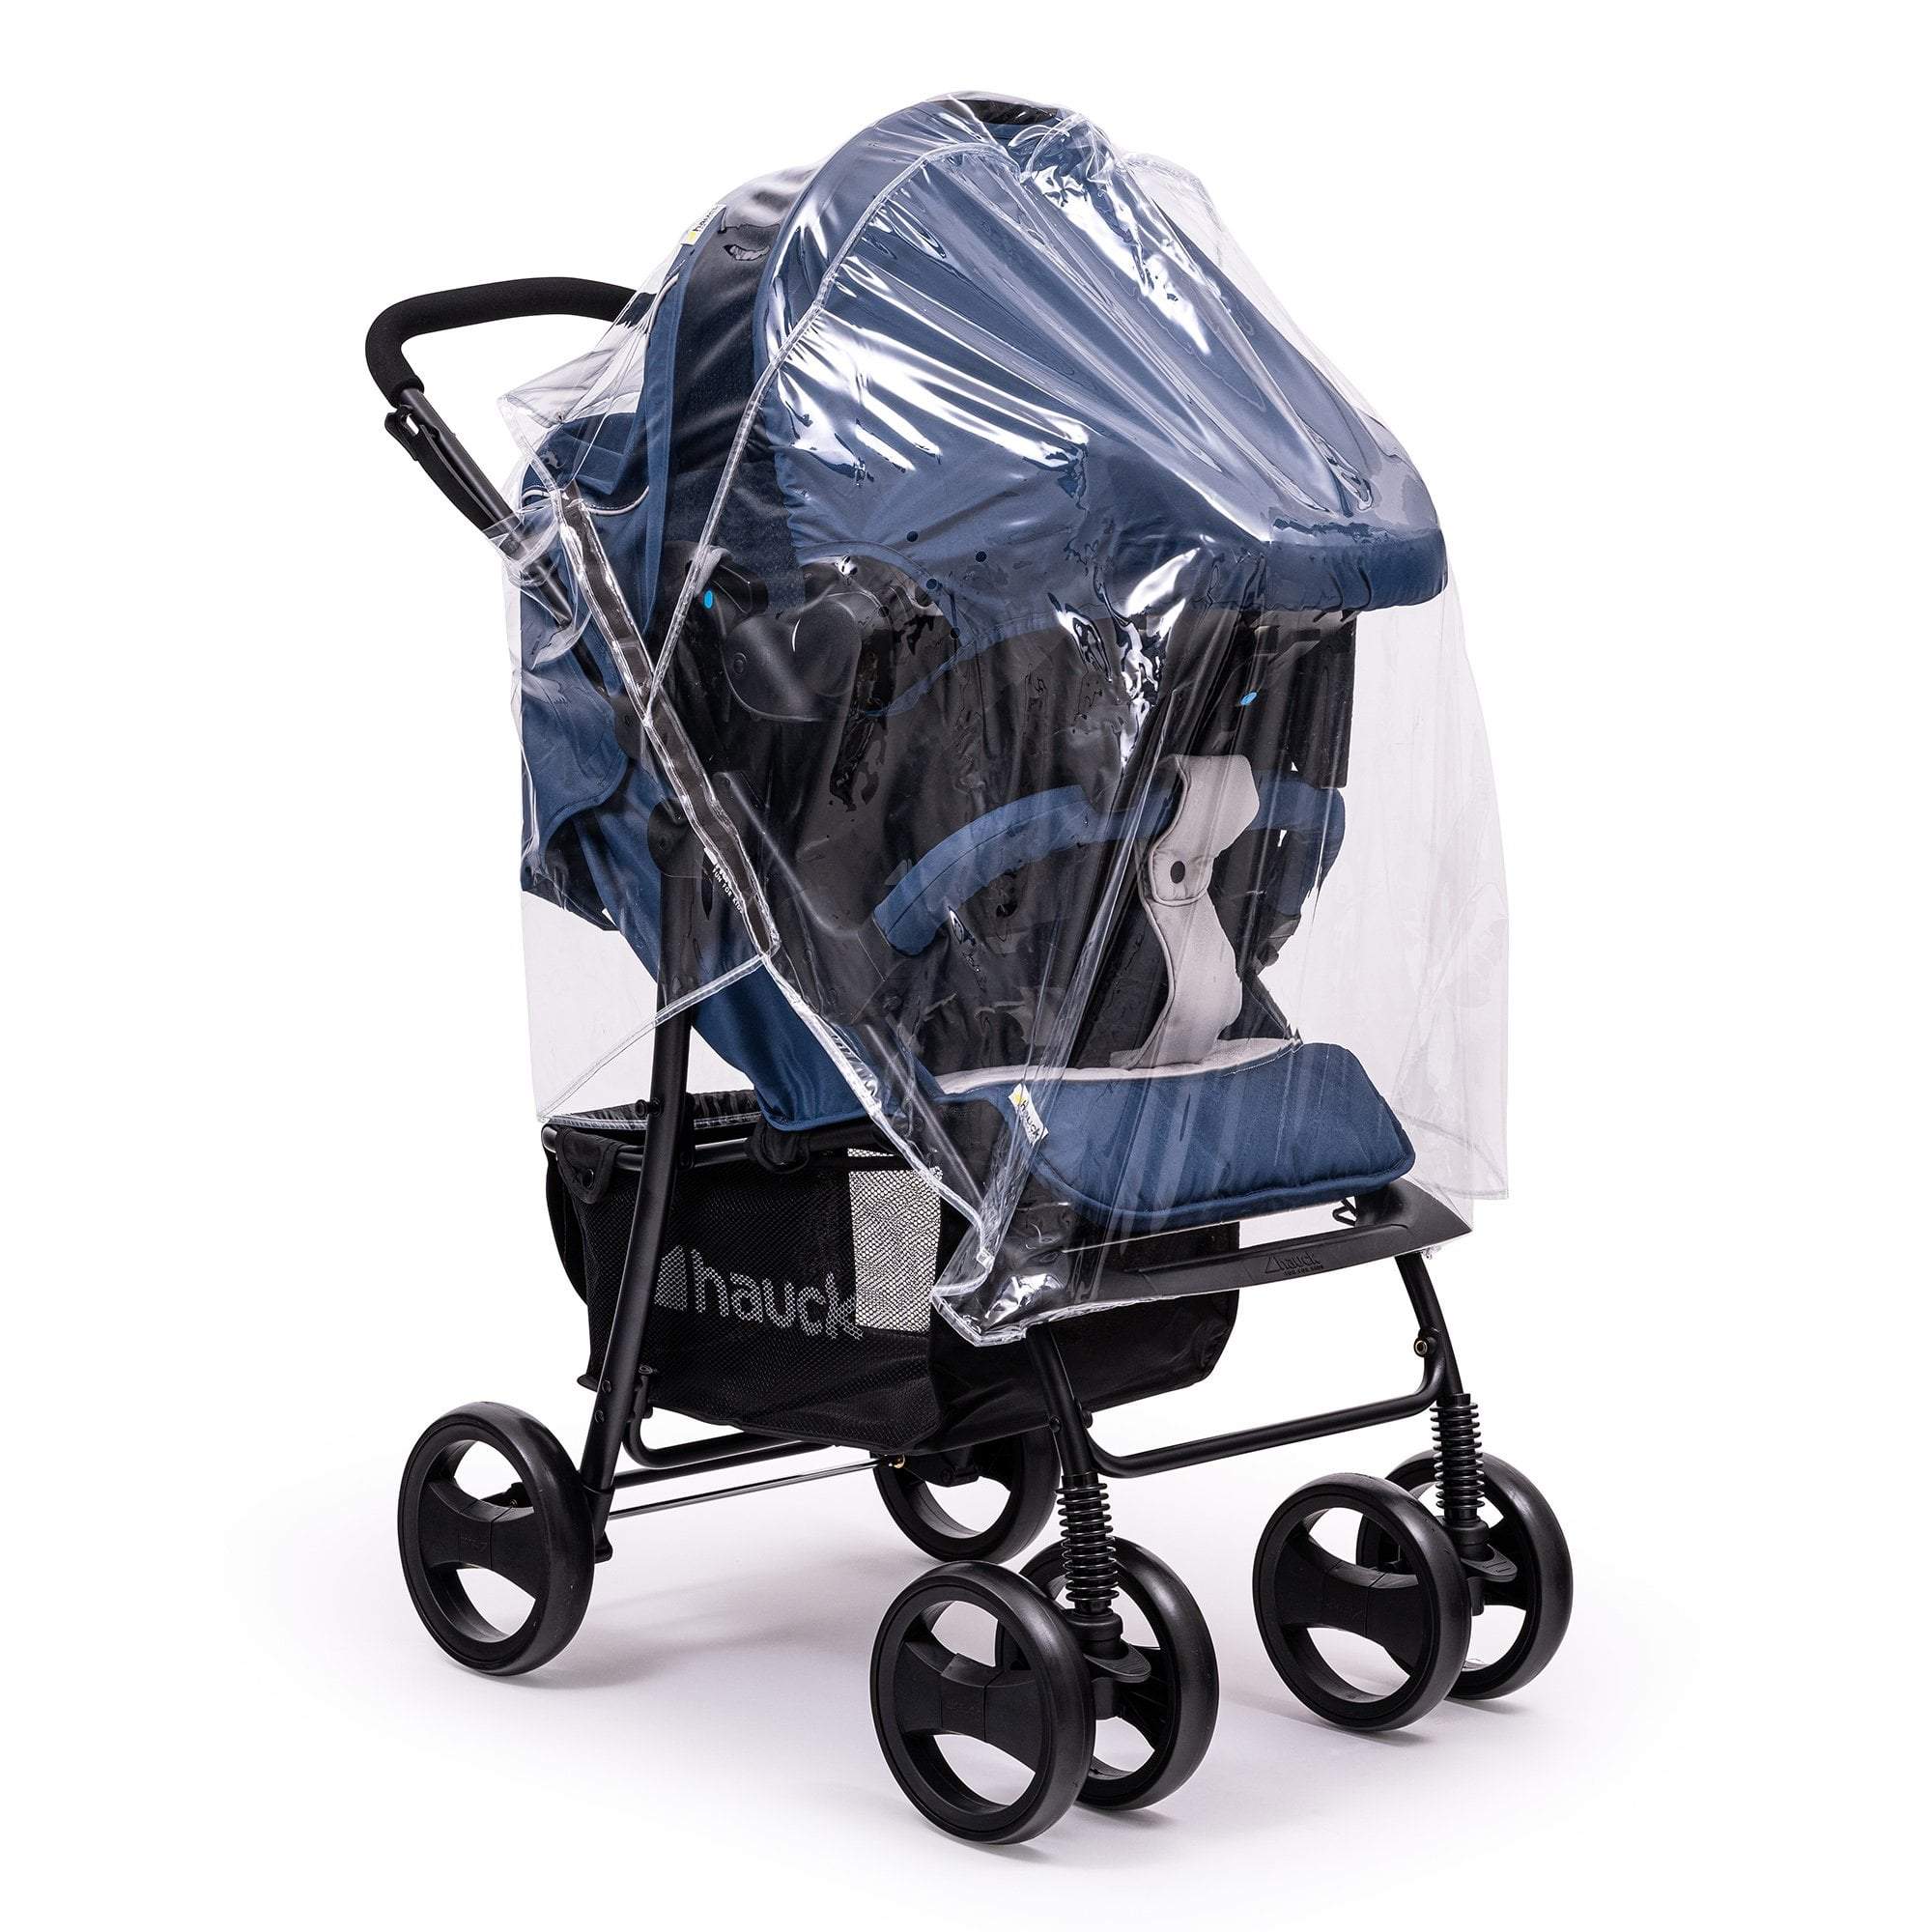 Travel System Raincover Compatible with Esprit - Fits All Models - For Your Little One